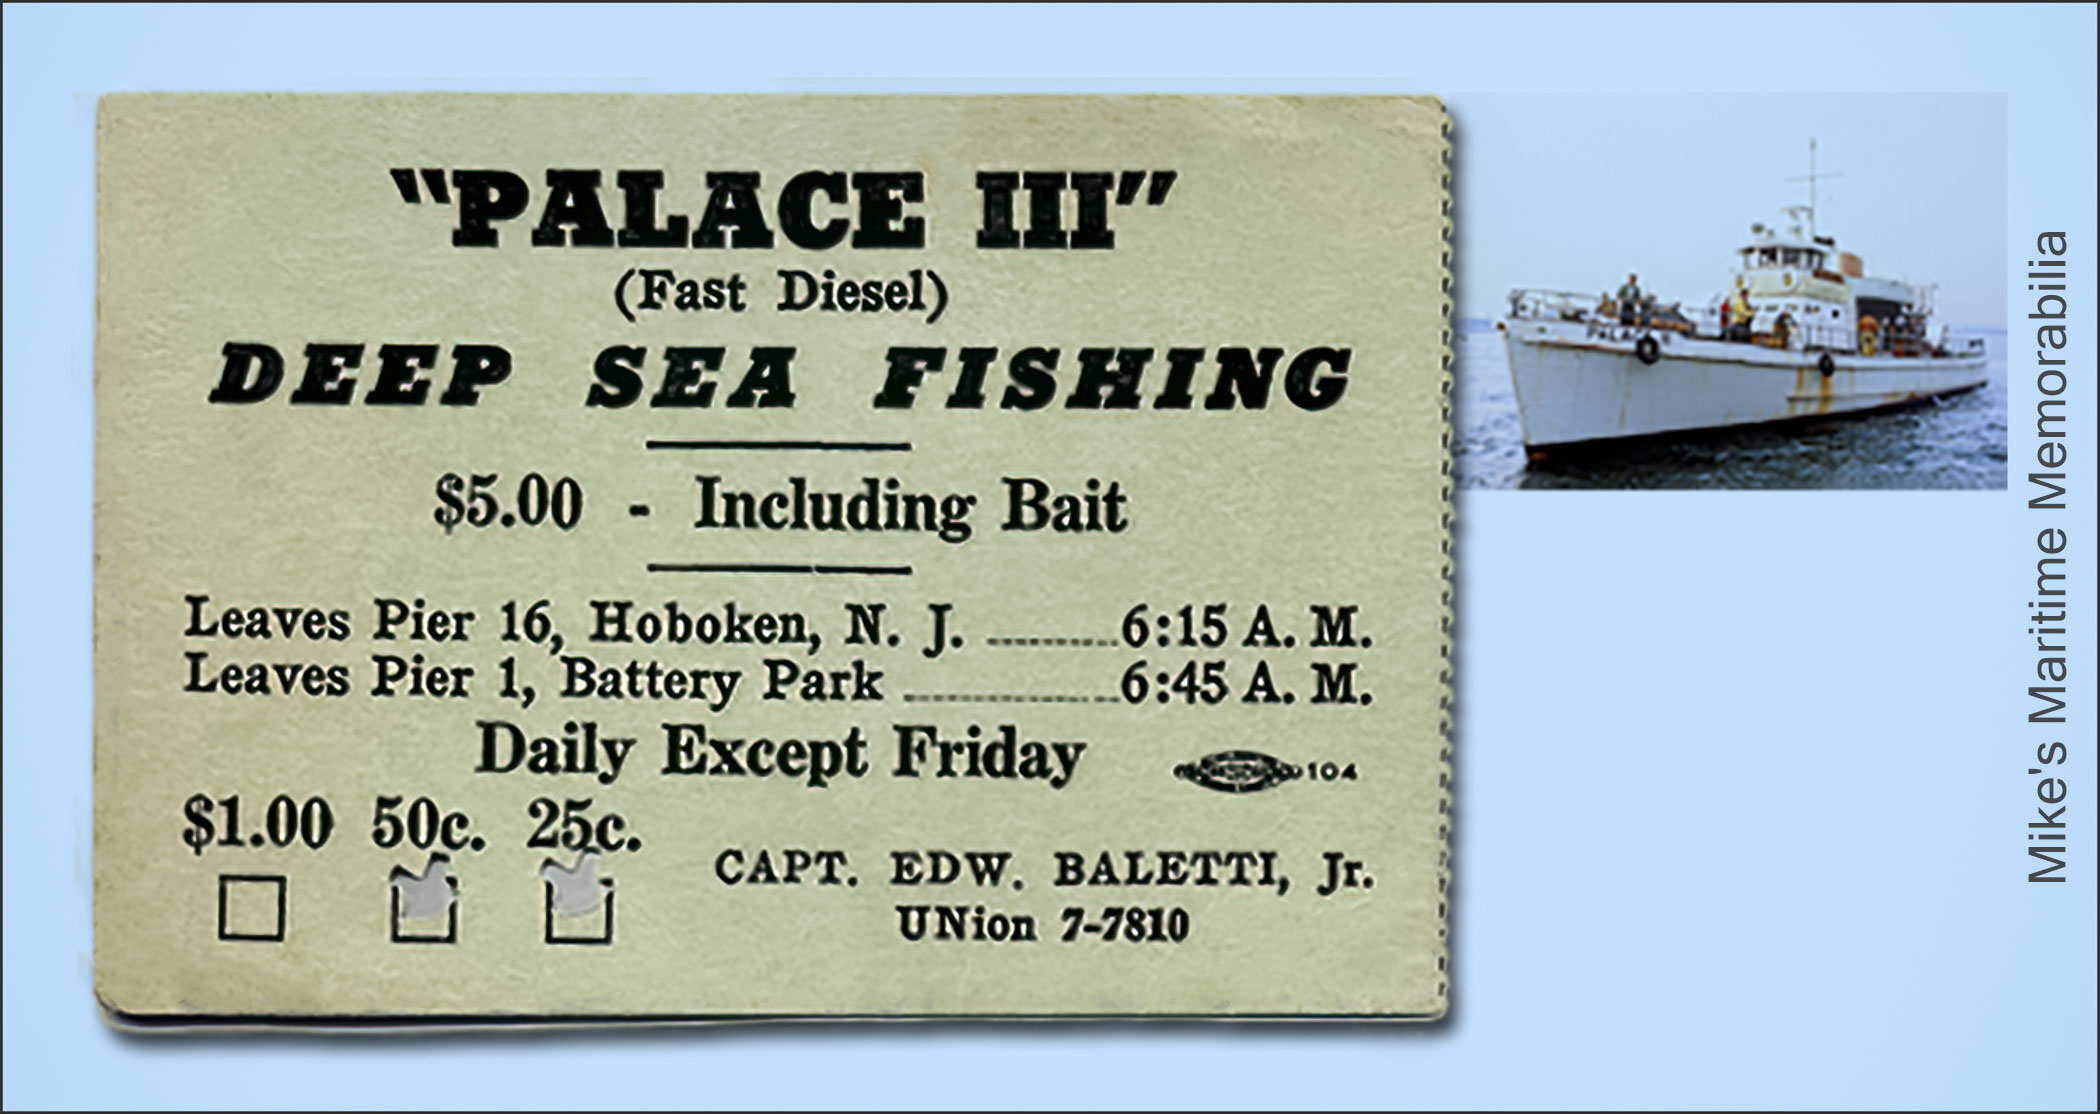 PALACE III Fare Ticket, Hoboken, NJ – 1954 Captain Ed Baletti's "PALACE III" was a converted World War II U.S. Navy Submarine Chaser, the "SC-1322", that was converted to Party Boat Fishing. As this 1954 fare ticket indicates, she sailed from Hoboken, NJ and picked up additional fares at the Battery in Manhattan. The adult fare was $5.00 and three daily pools were offered at 25¢, 50¢ and $1.